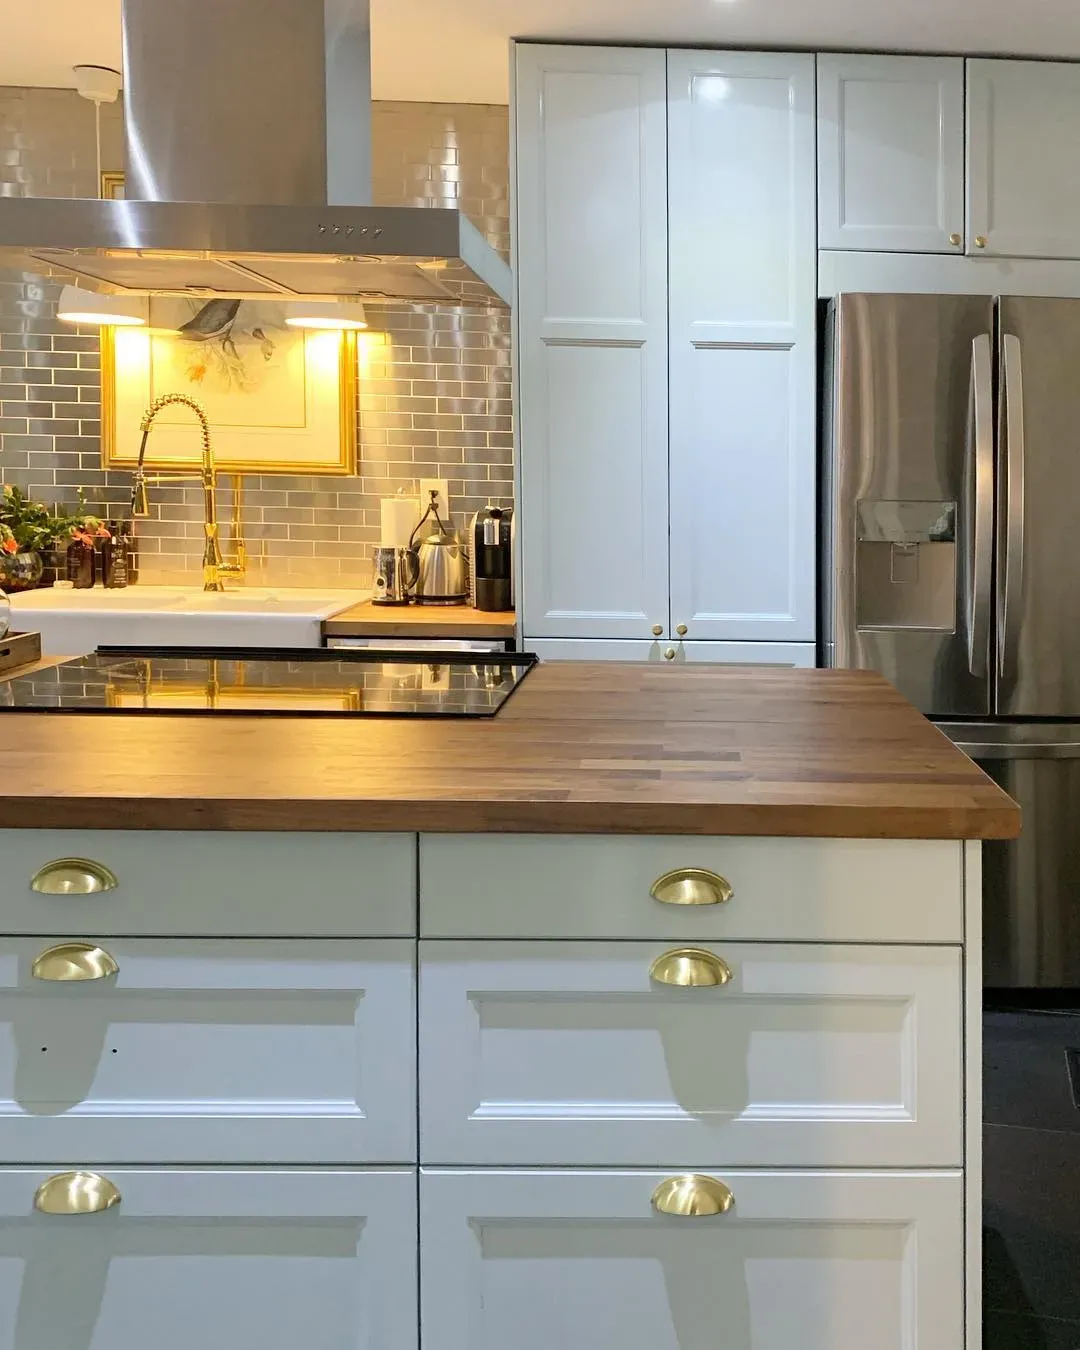 Ocean Air kitchen cabinets color review